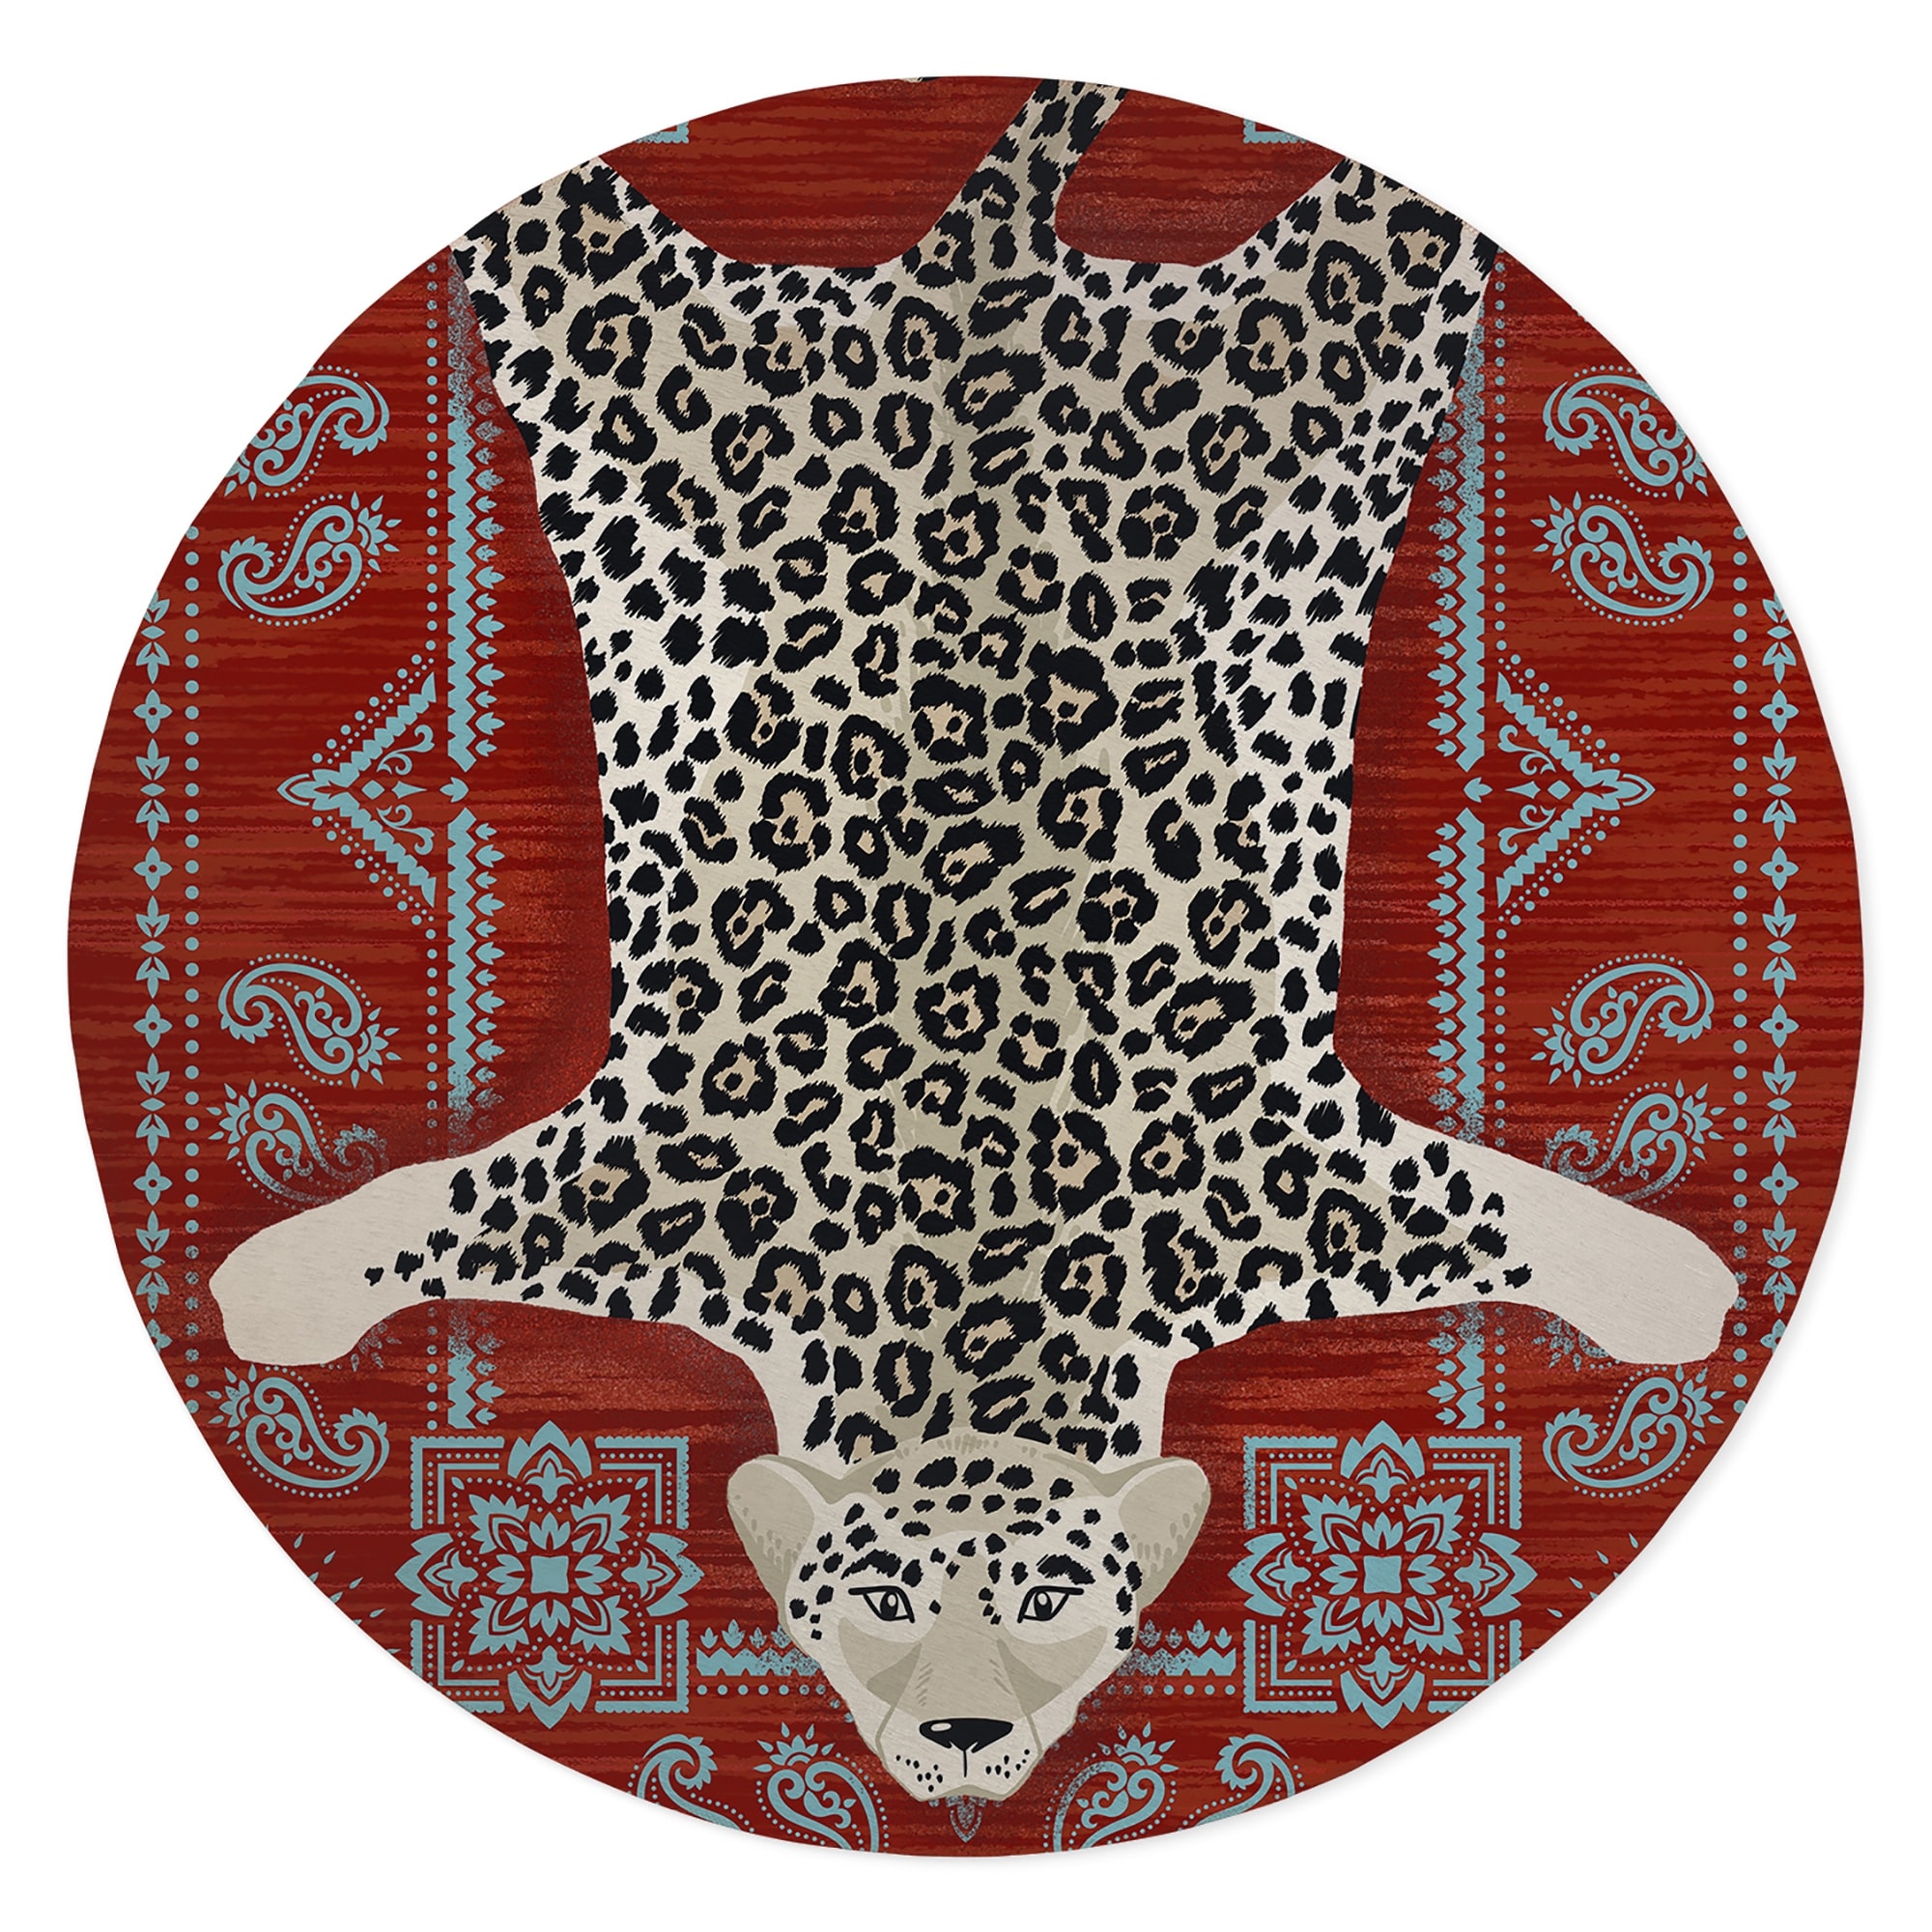 https://ak1.ostkcdn.com/images/products/is/images/direct/9ce01e9a75722879d46bc124887b5dbd98c7a9f3/SNOW-LEOPARD-RED-Indoor-Floor-Mat-By-Kavka-Designs.jpg